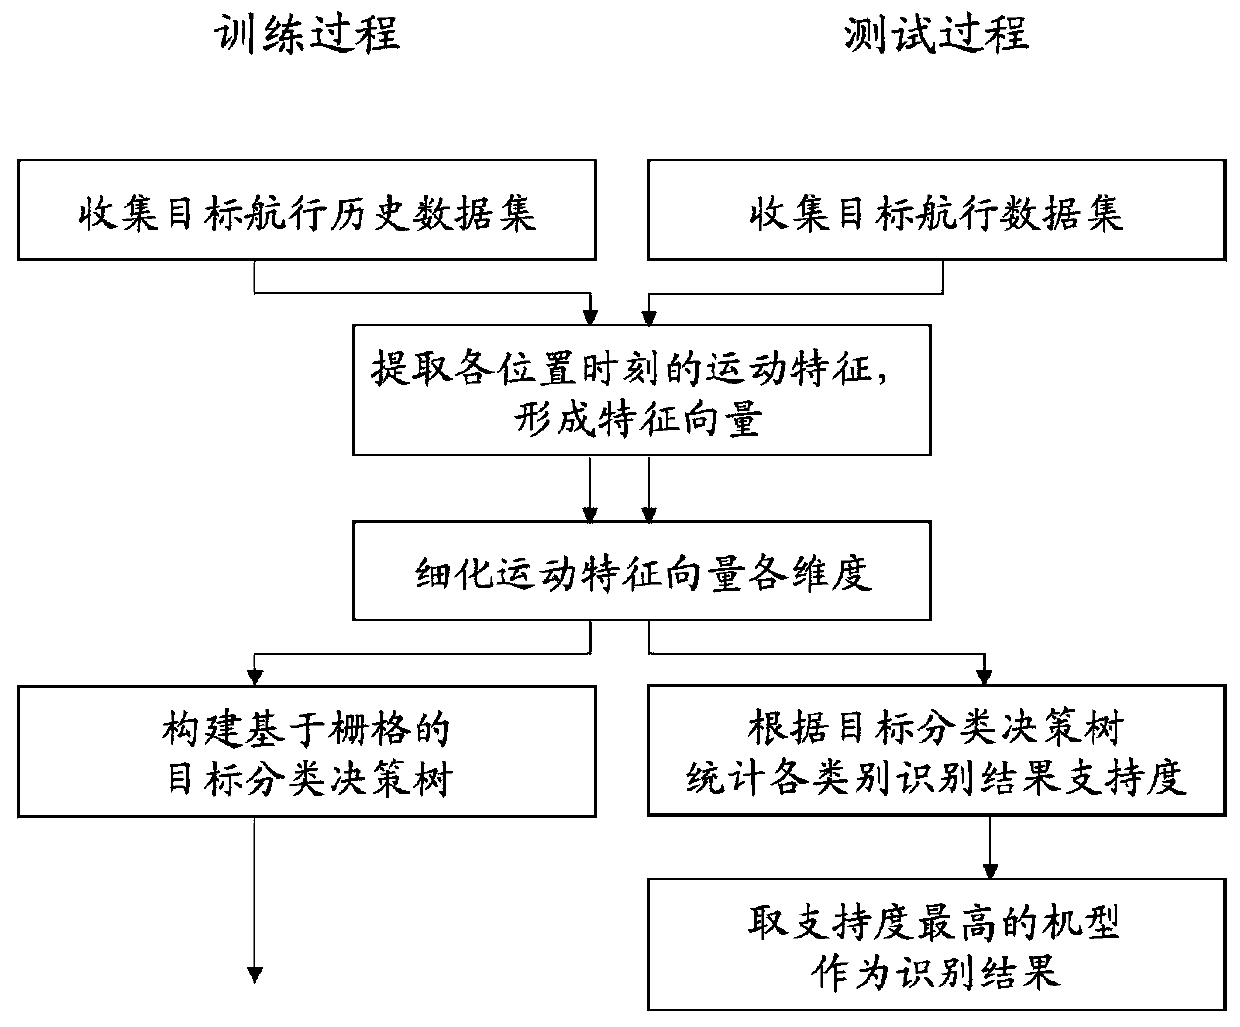 Aerial target identification method and system based on improved decision tree